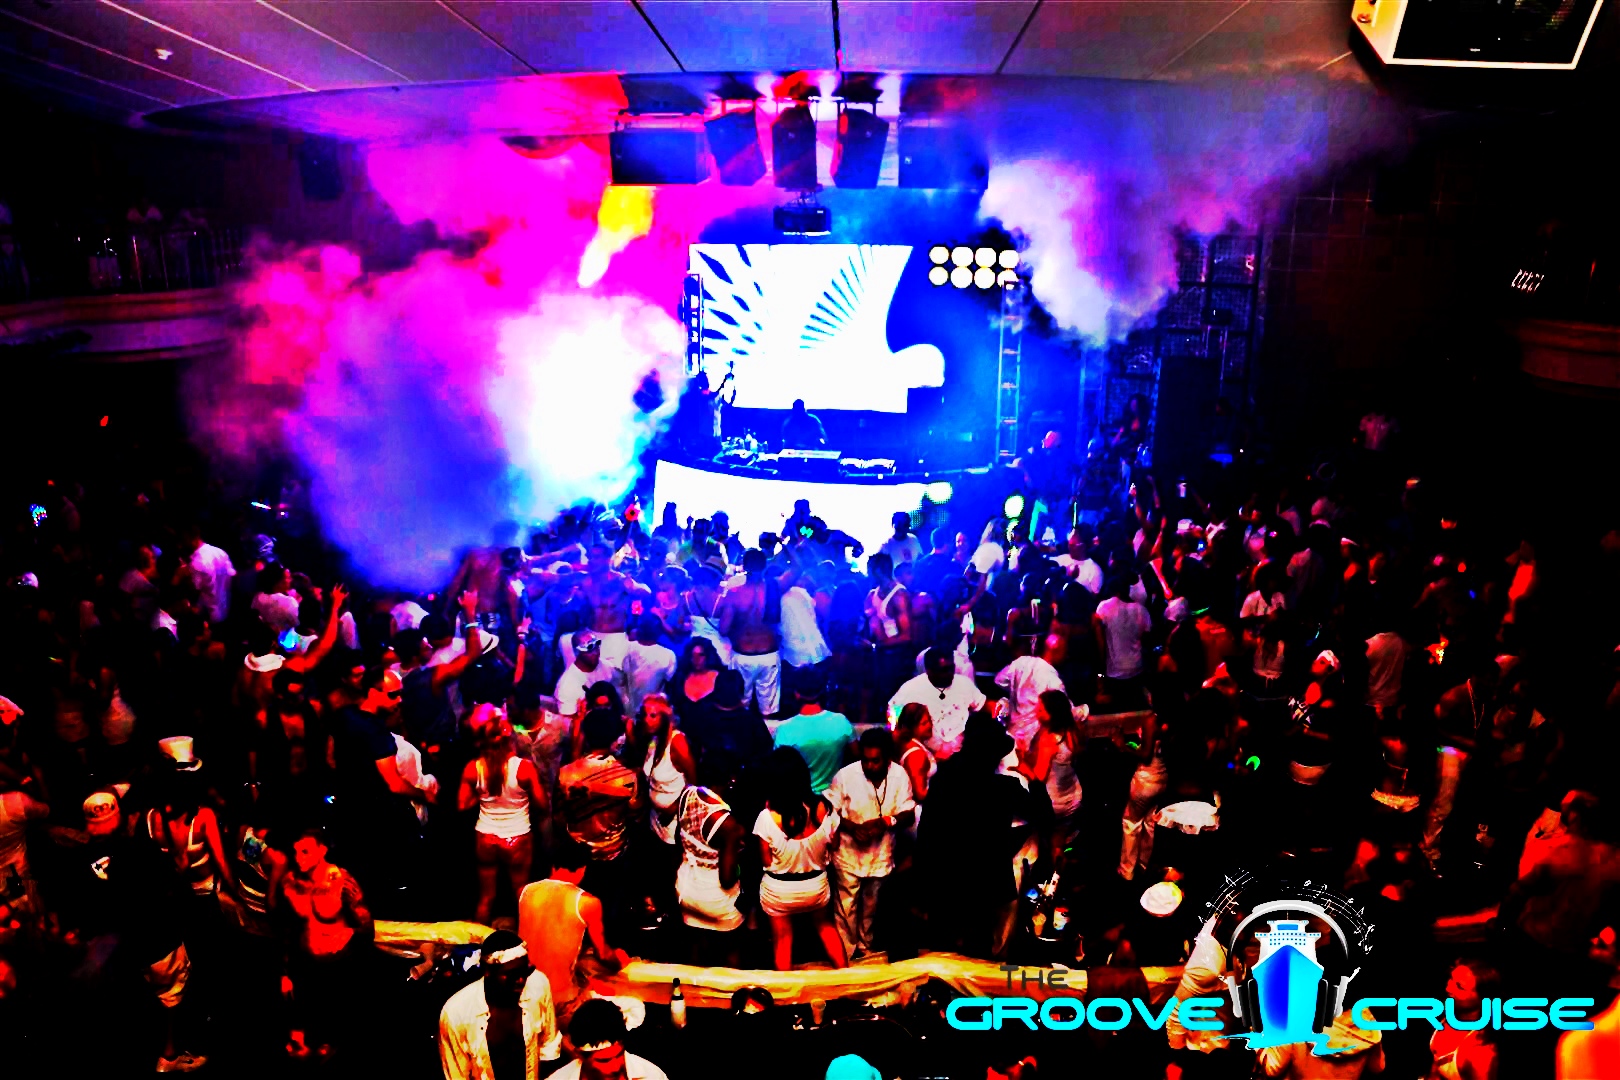 The Groove Cruise enlists some of the hottest DJs in house music (Photo courtesy of The Groove Cruise).